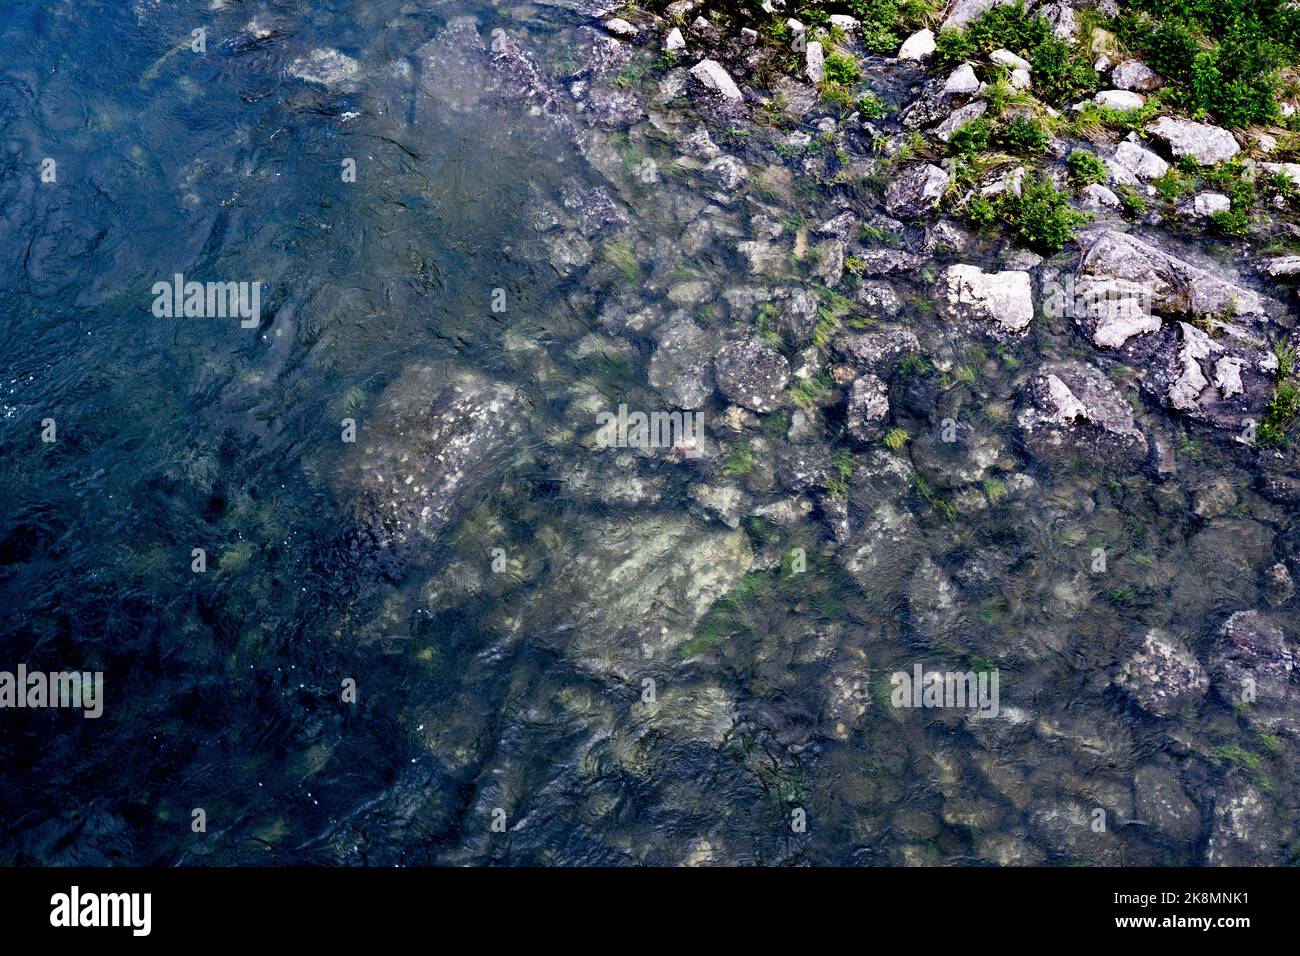 Rocks by the banks of the GudbrandsdalslÃ¥gen River, Oppland, Norway. Stock Photo